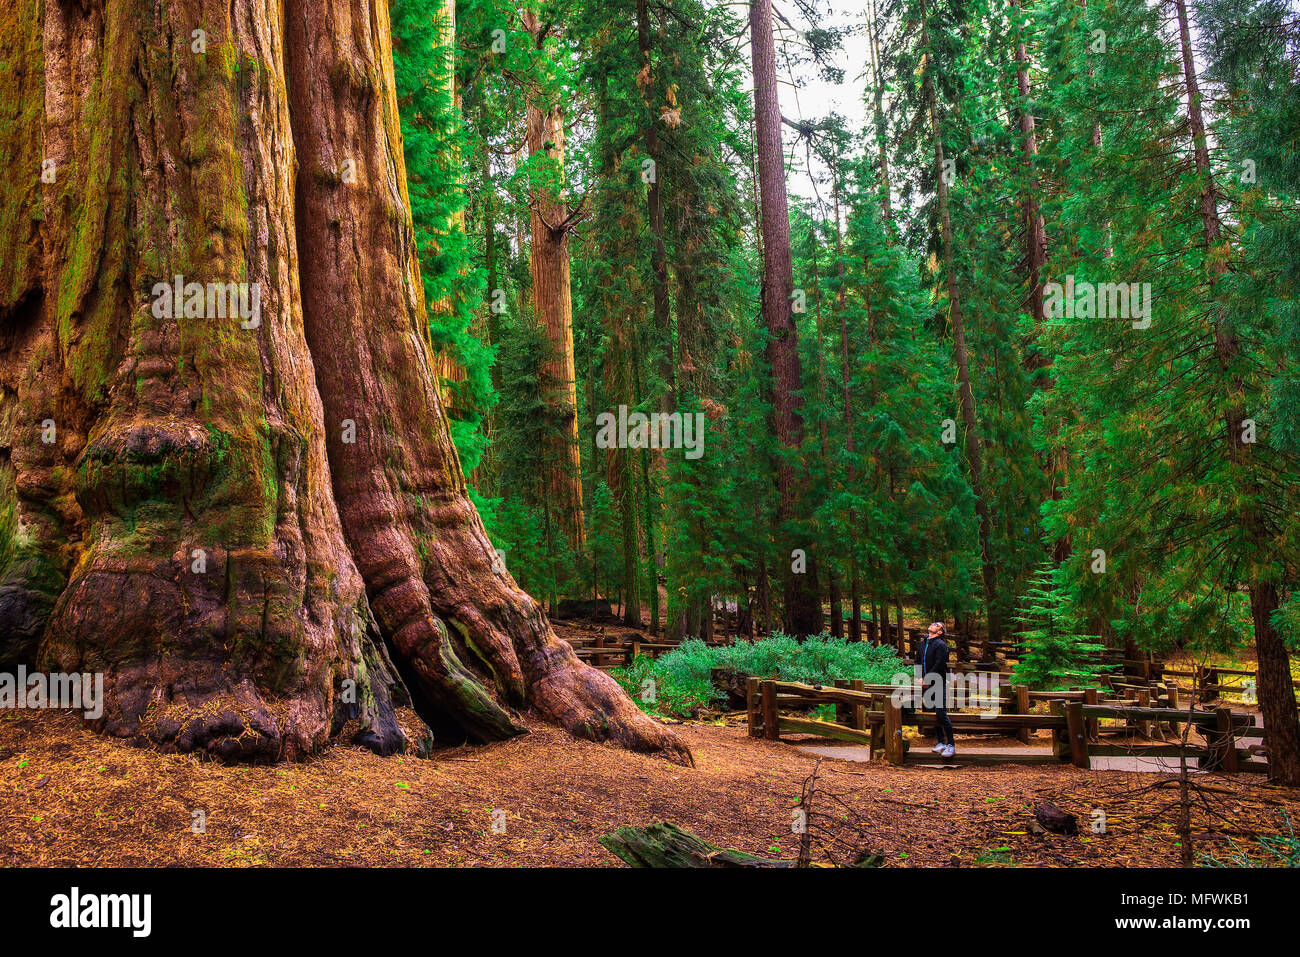 Tourist looks up at a giant sequoia tree Stock Photo